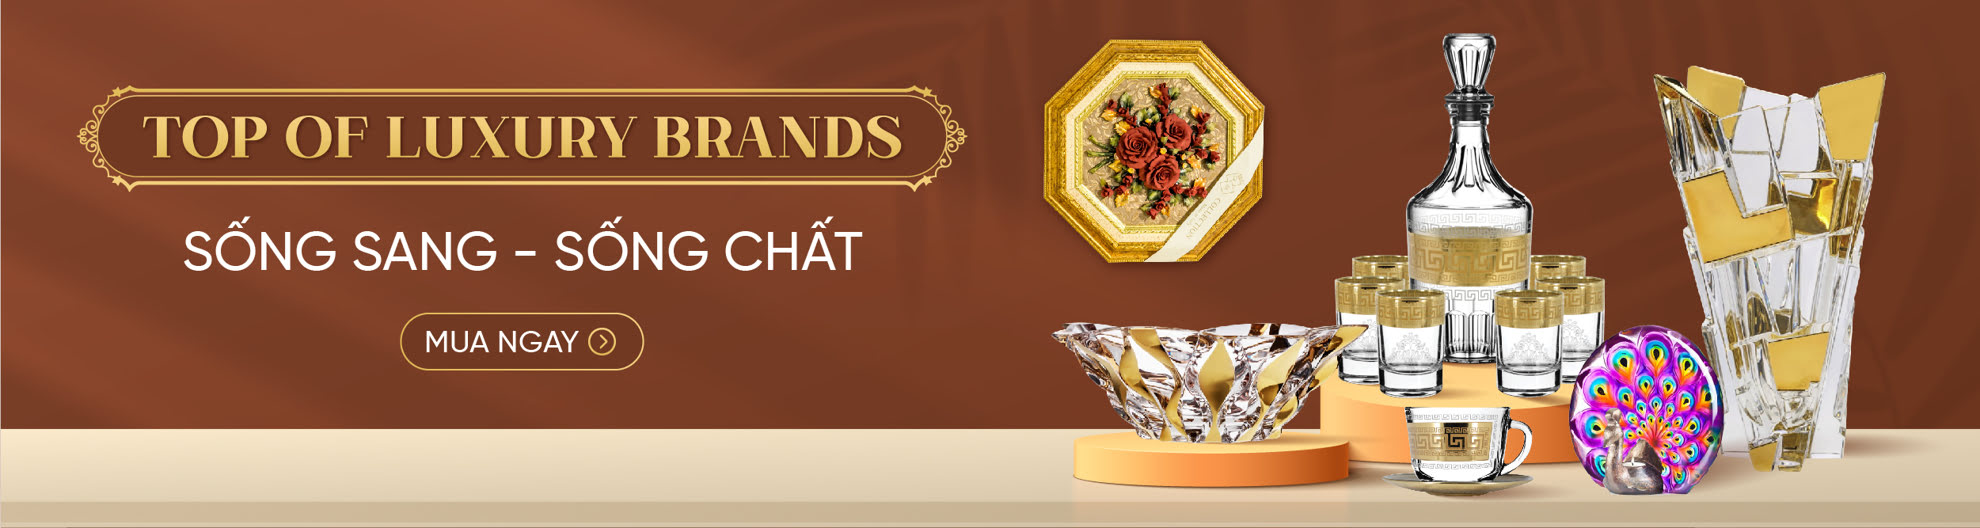 TOP OF LUXURY BRAND - SỐNG SANG - SỐNG CHẤT